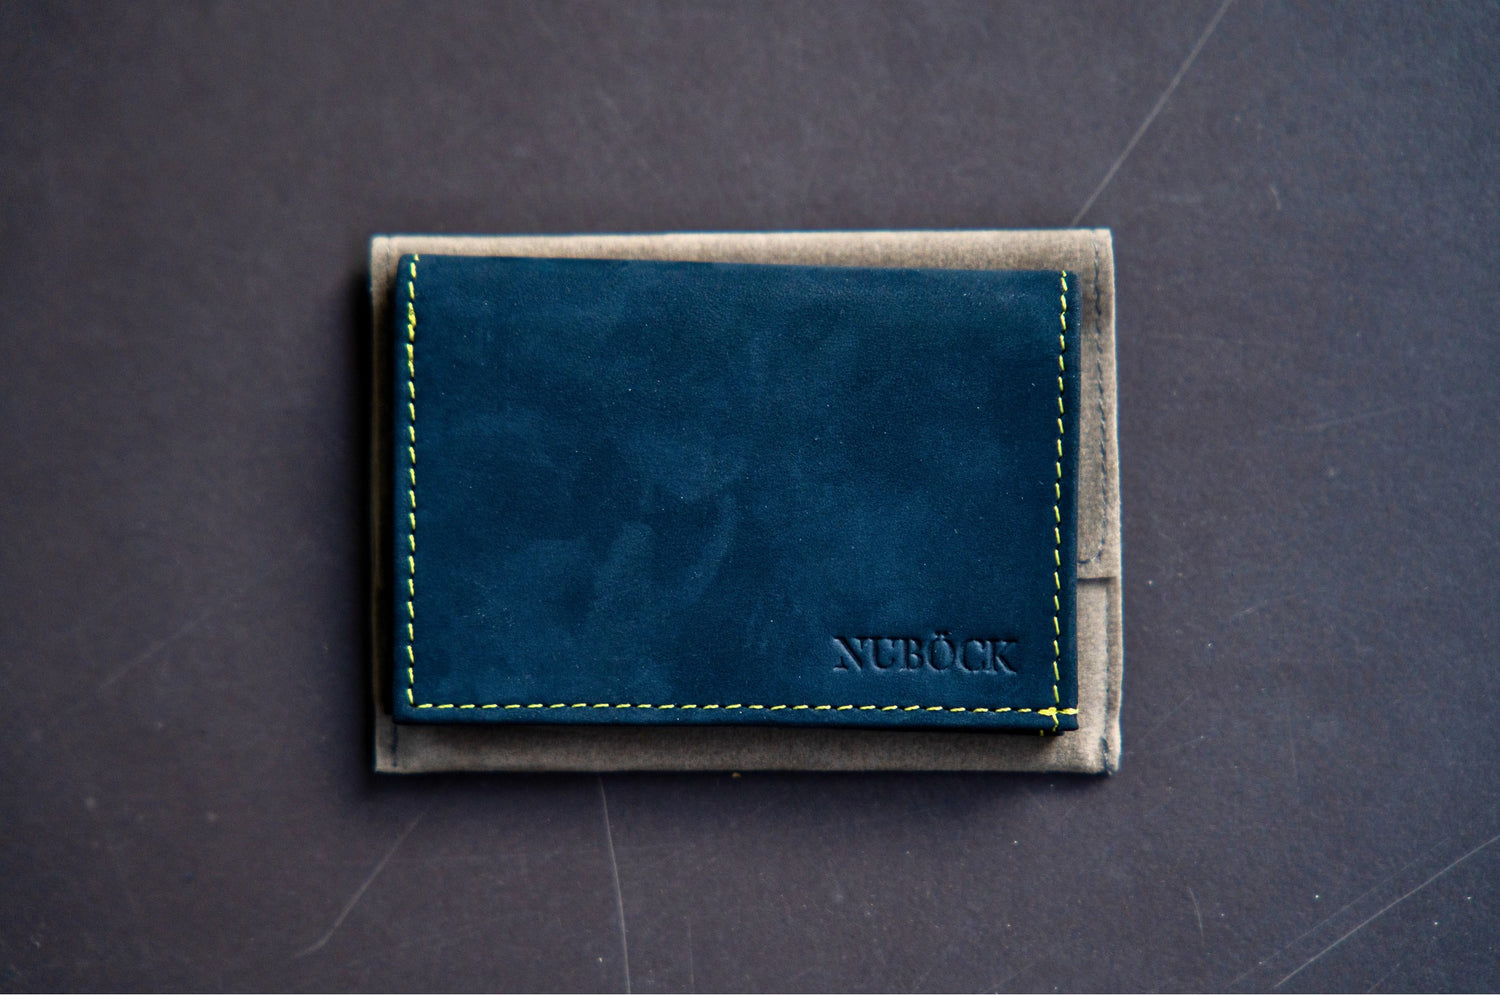 NUBÖCK - The Executive minimalistic nubuck leather wallet. Designed for you that favor a proffesional high end wallet. 